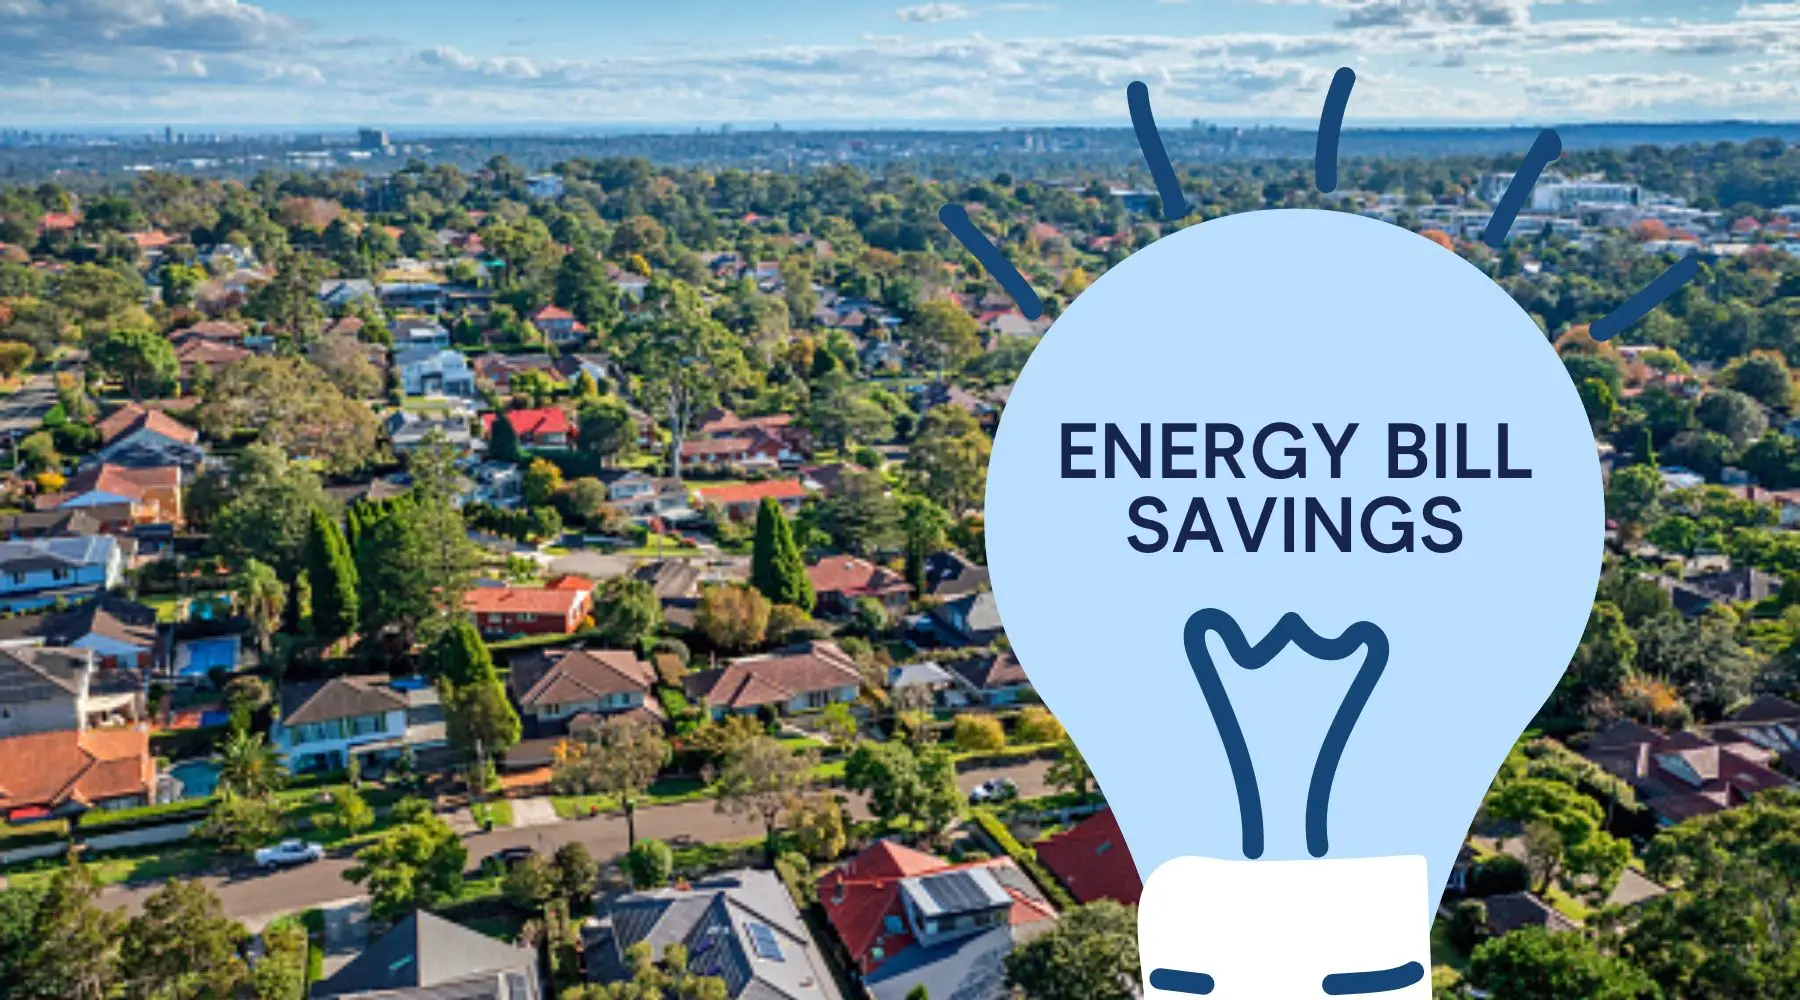 new-nsw-rules-could-cut-energy-bills-by-970-what-s-the-catch